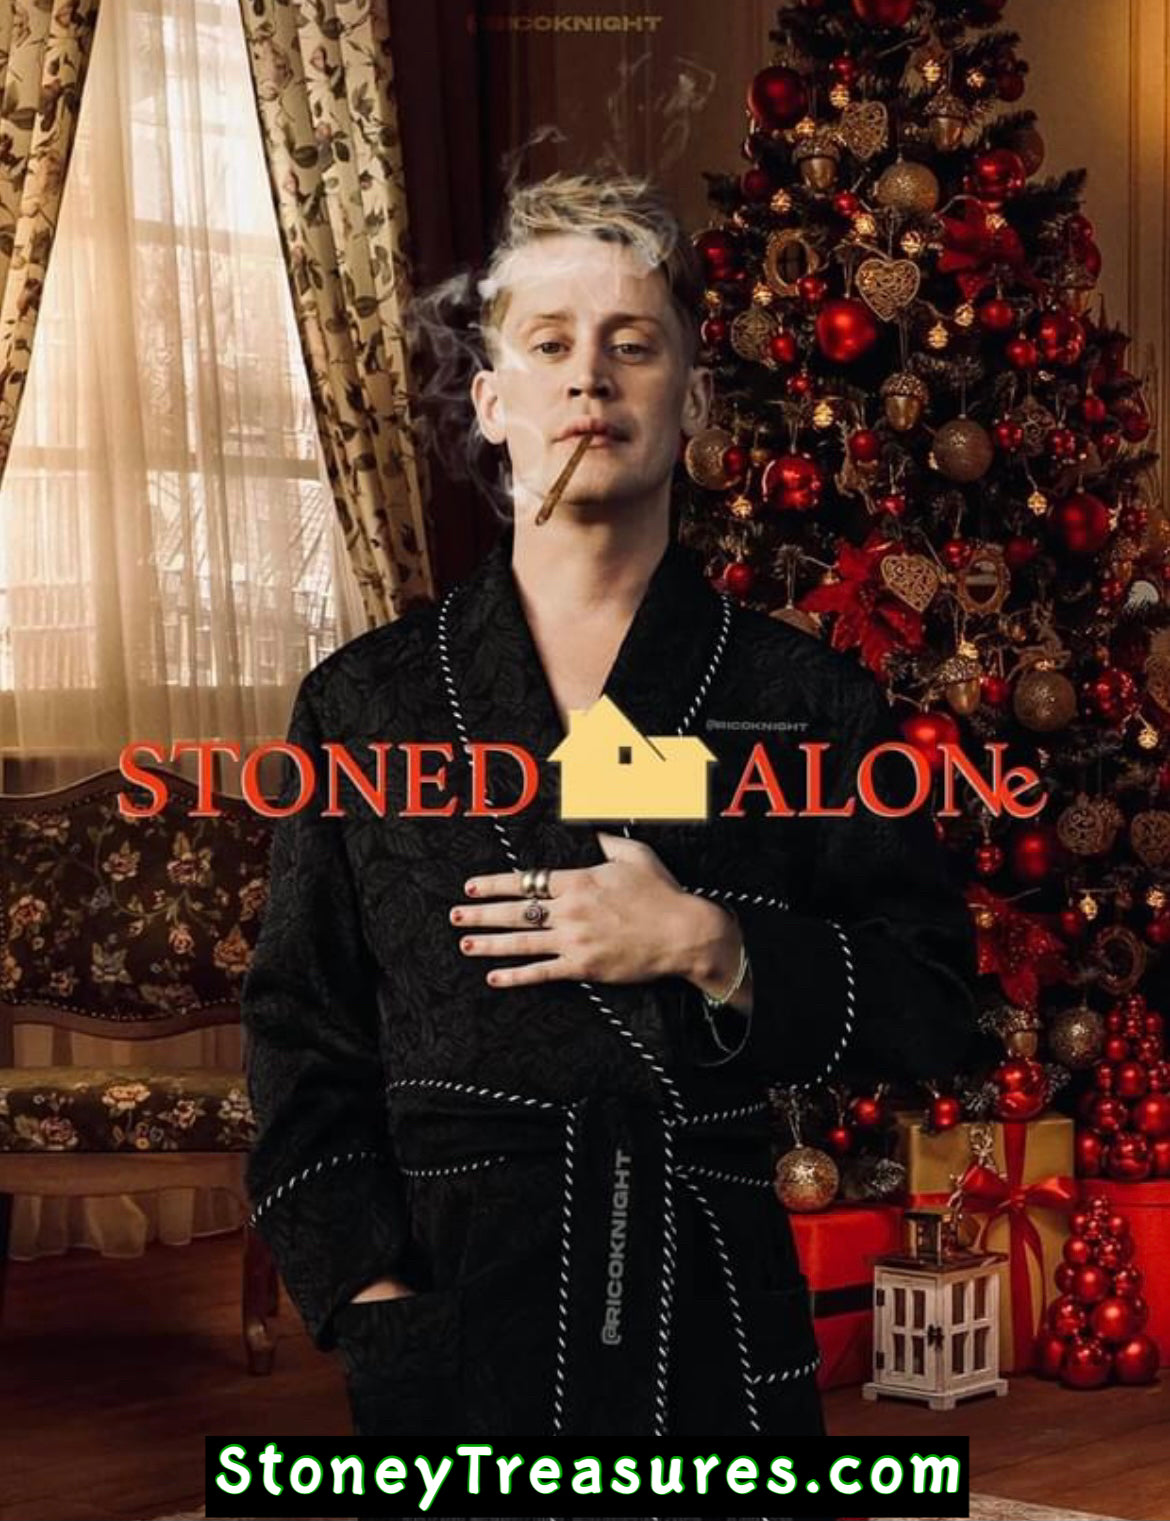 Stoned Alone meme is Stoned America’s mood